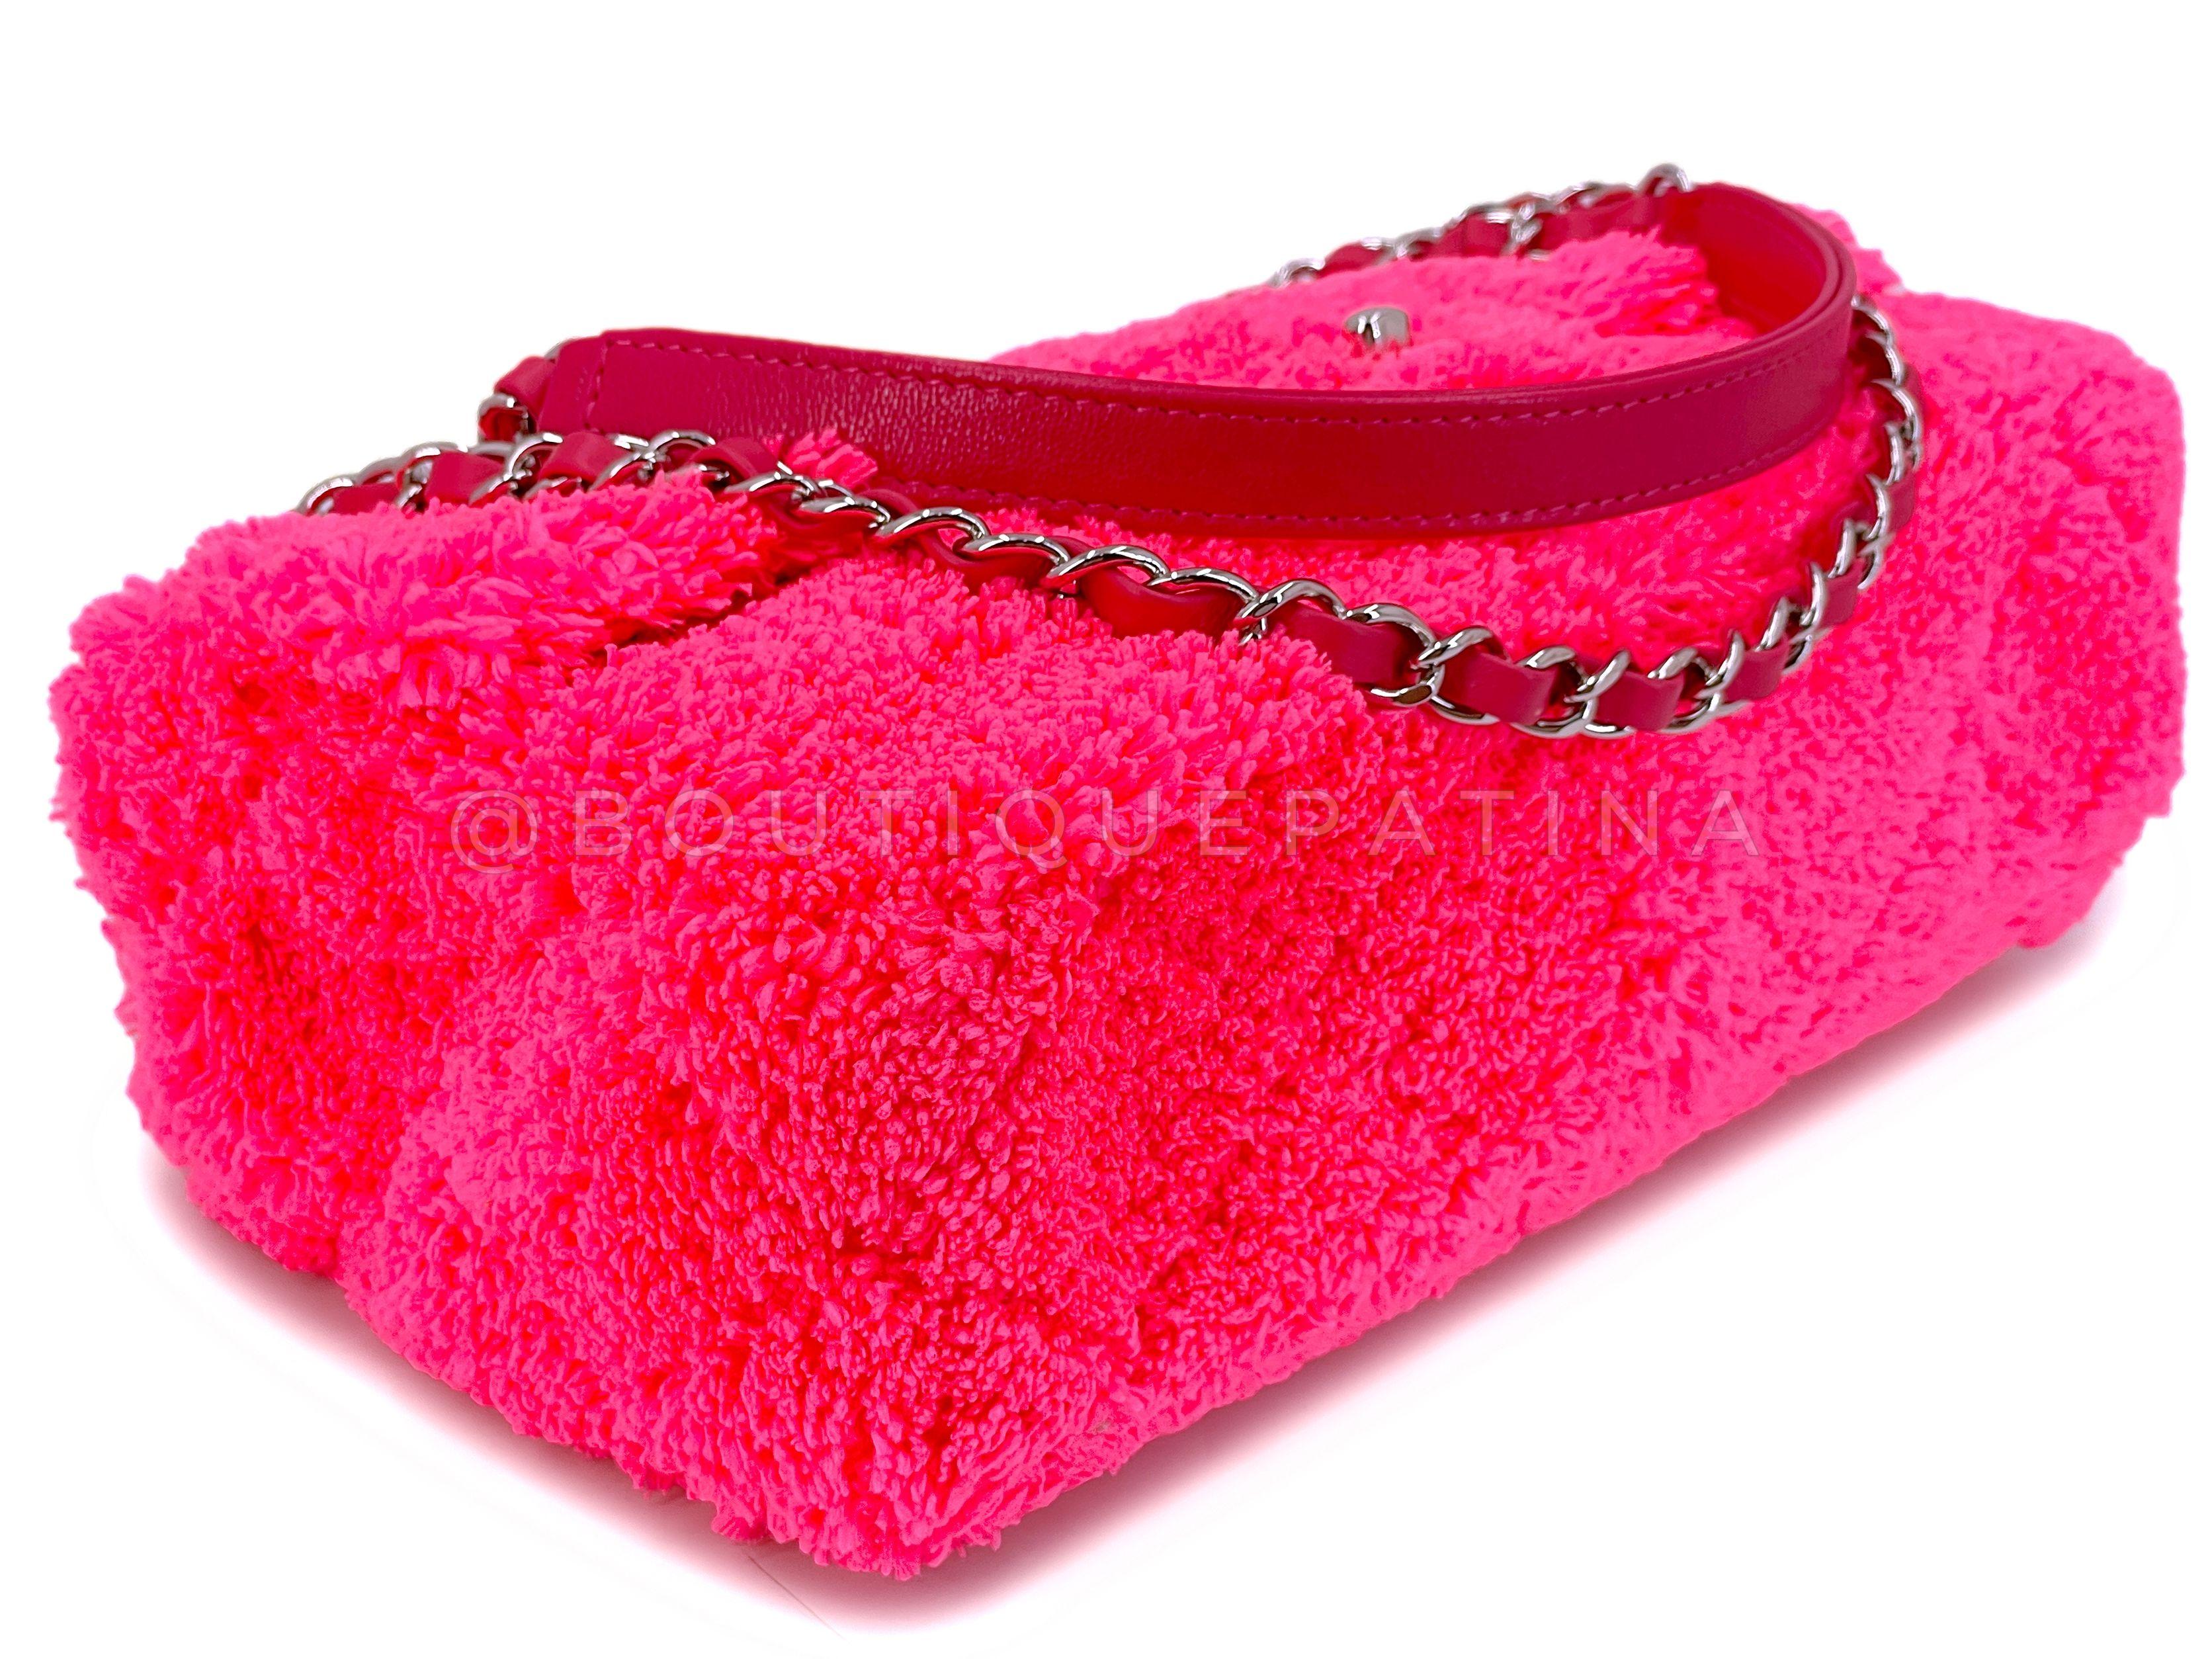 Chanel Neon Pink Terry Fur Flap Bag 67683 For Sale 3